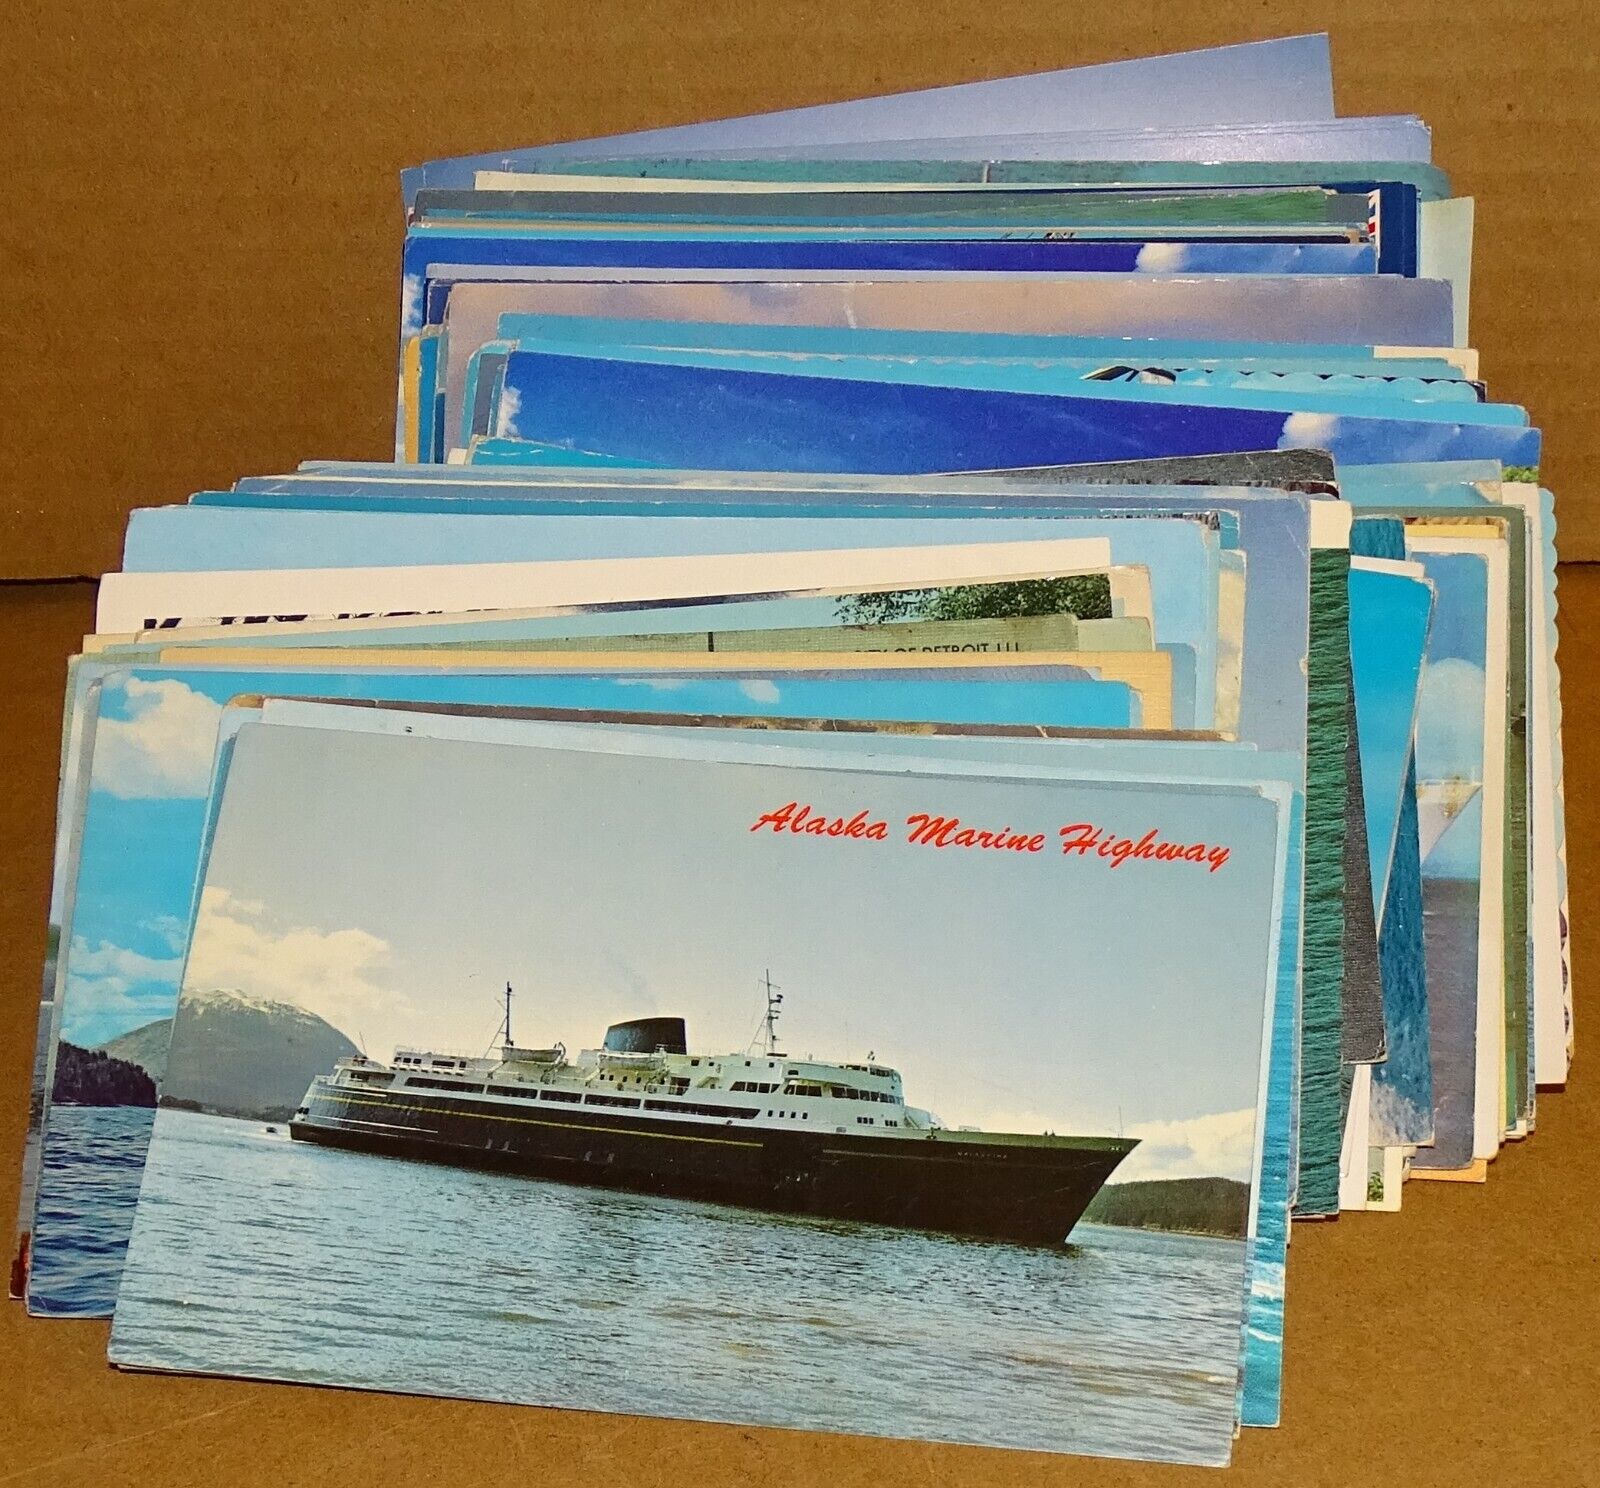 Ships, Boats, Nautical Themed - 230 Postcards from estate sale